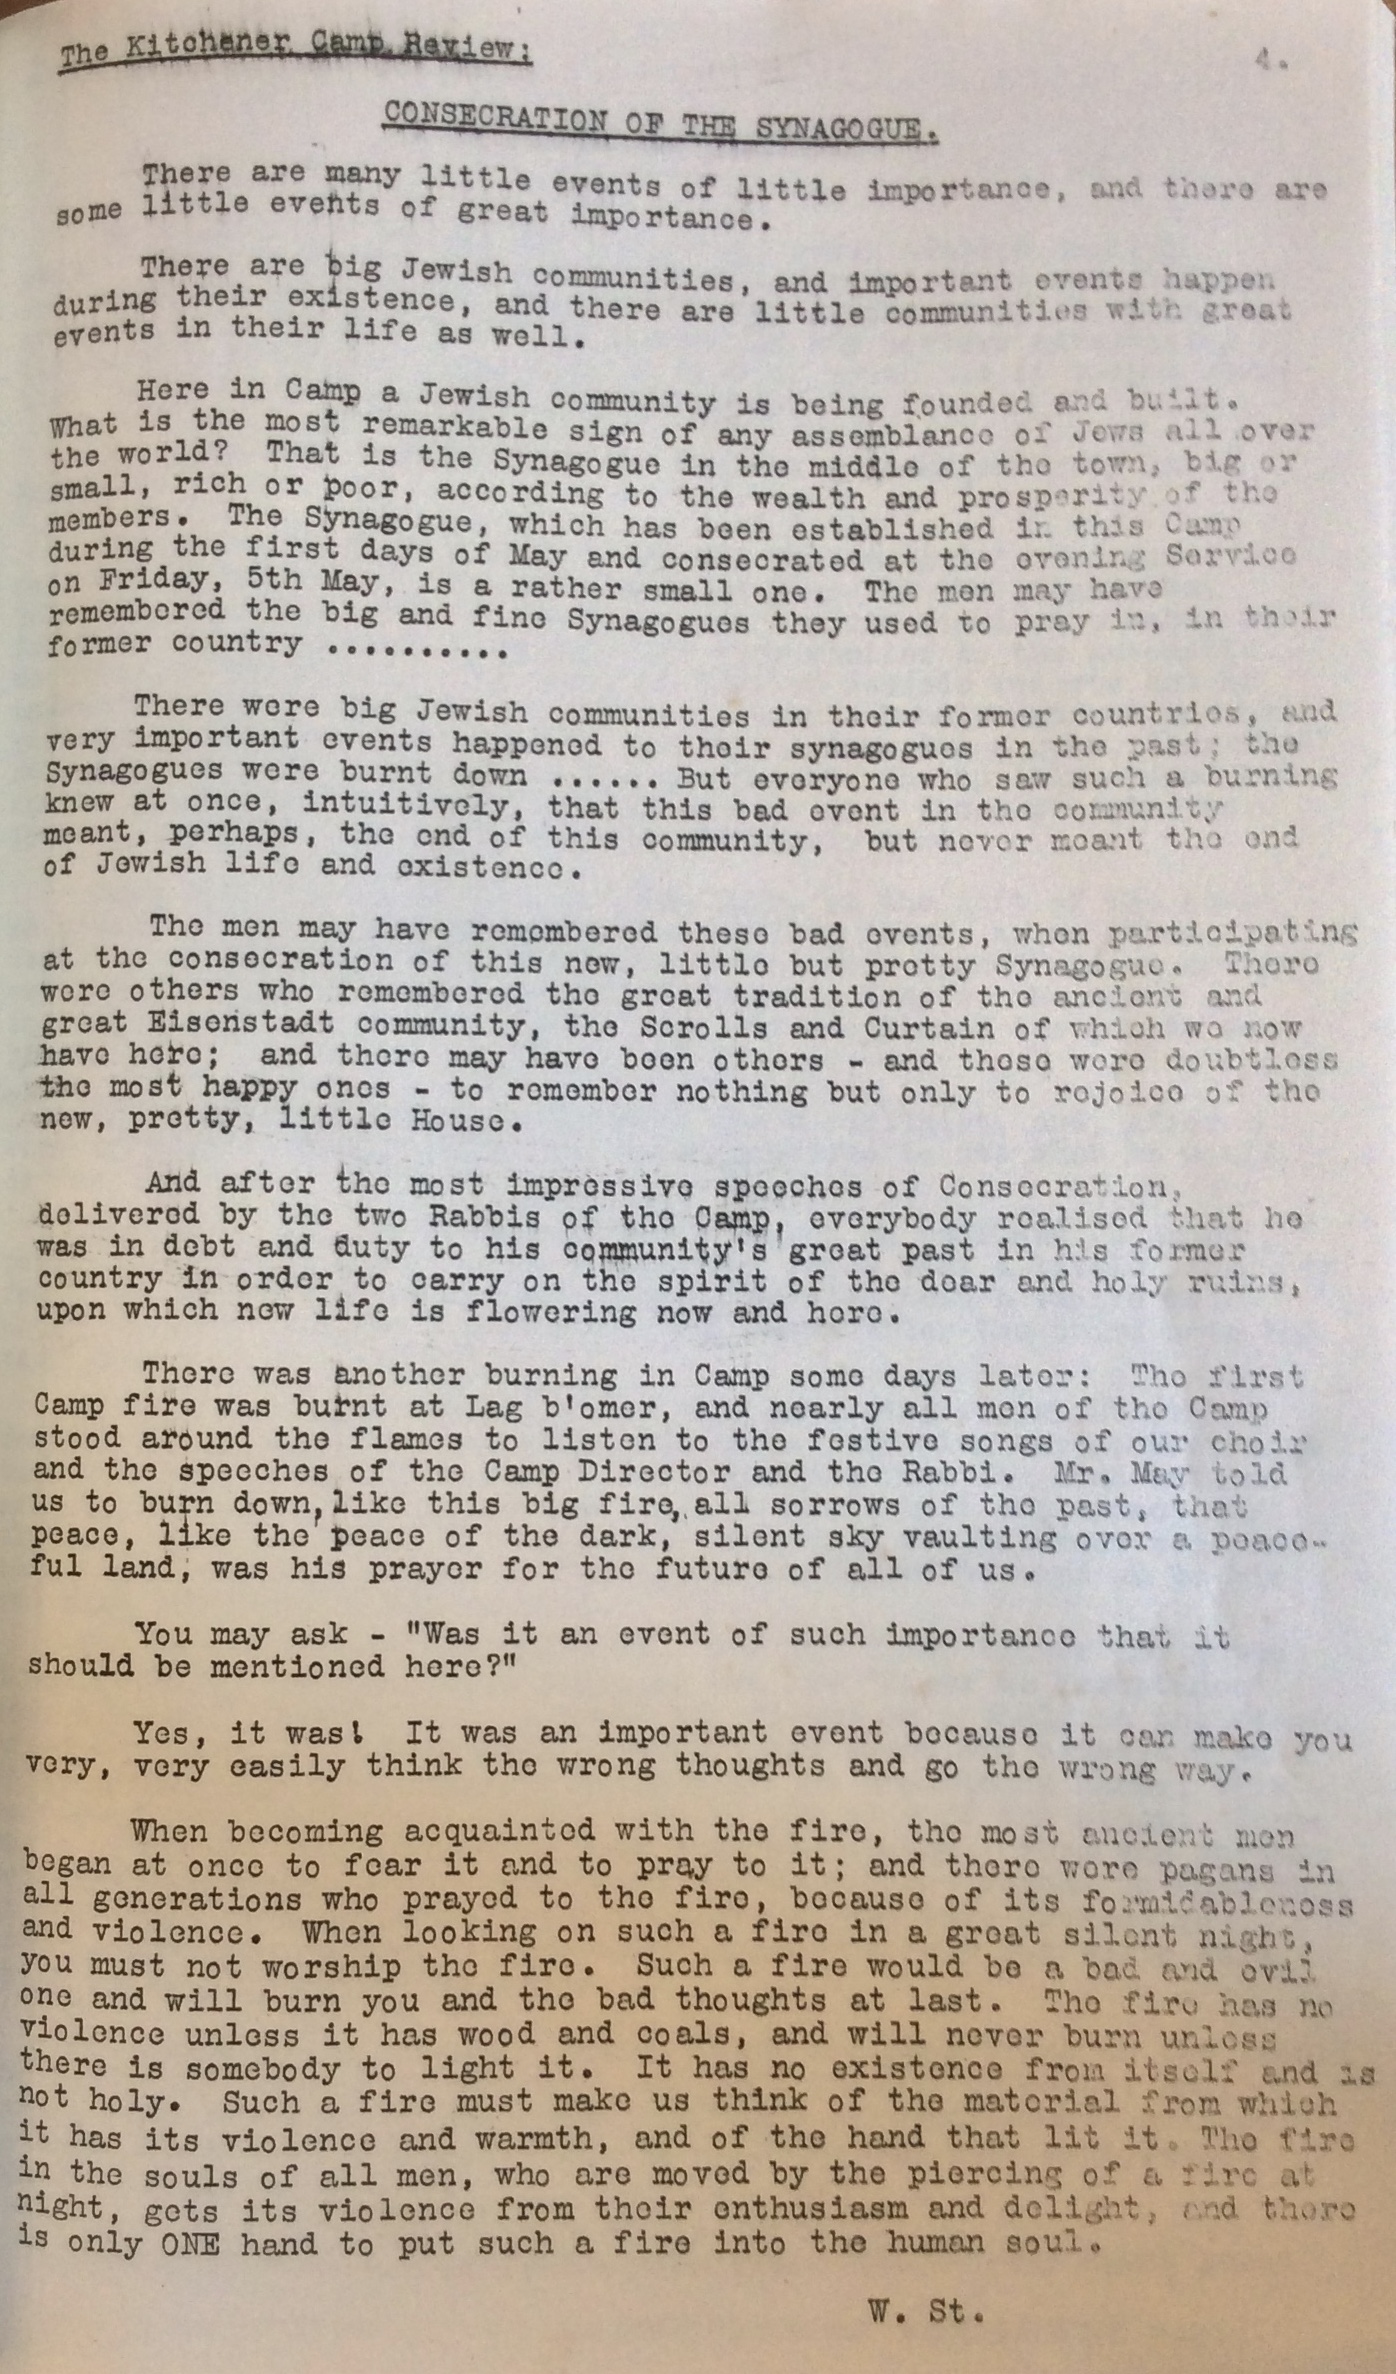 Kitchener Camp Review, June 1939, page 4